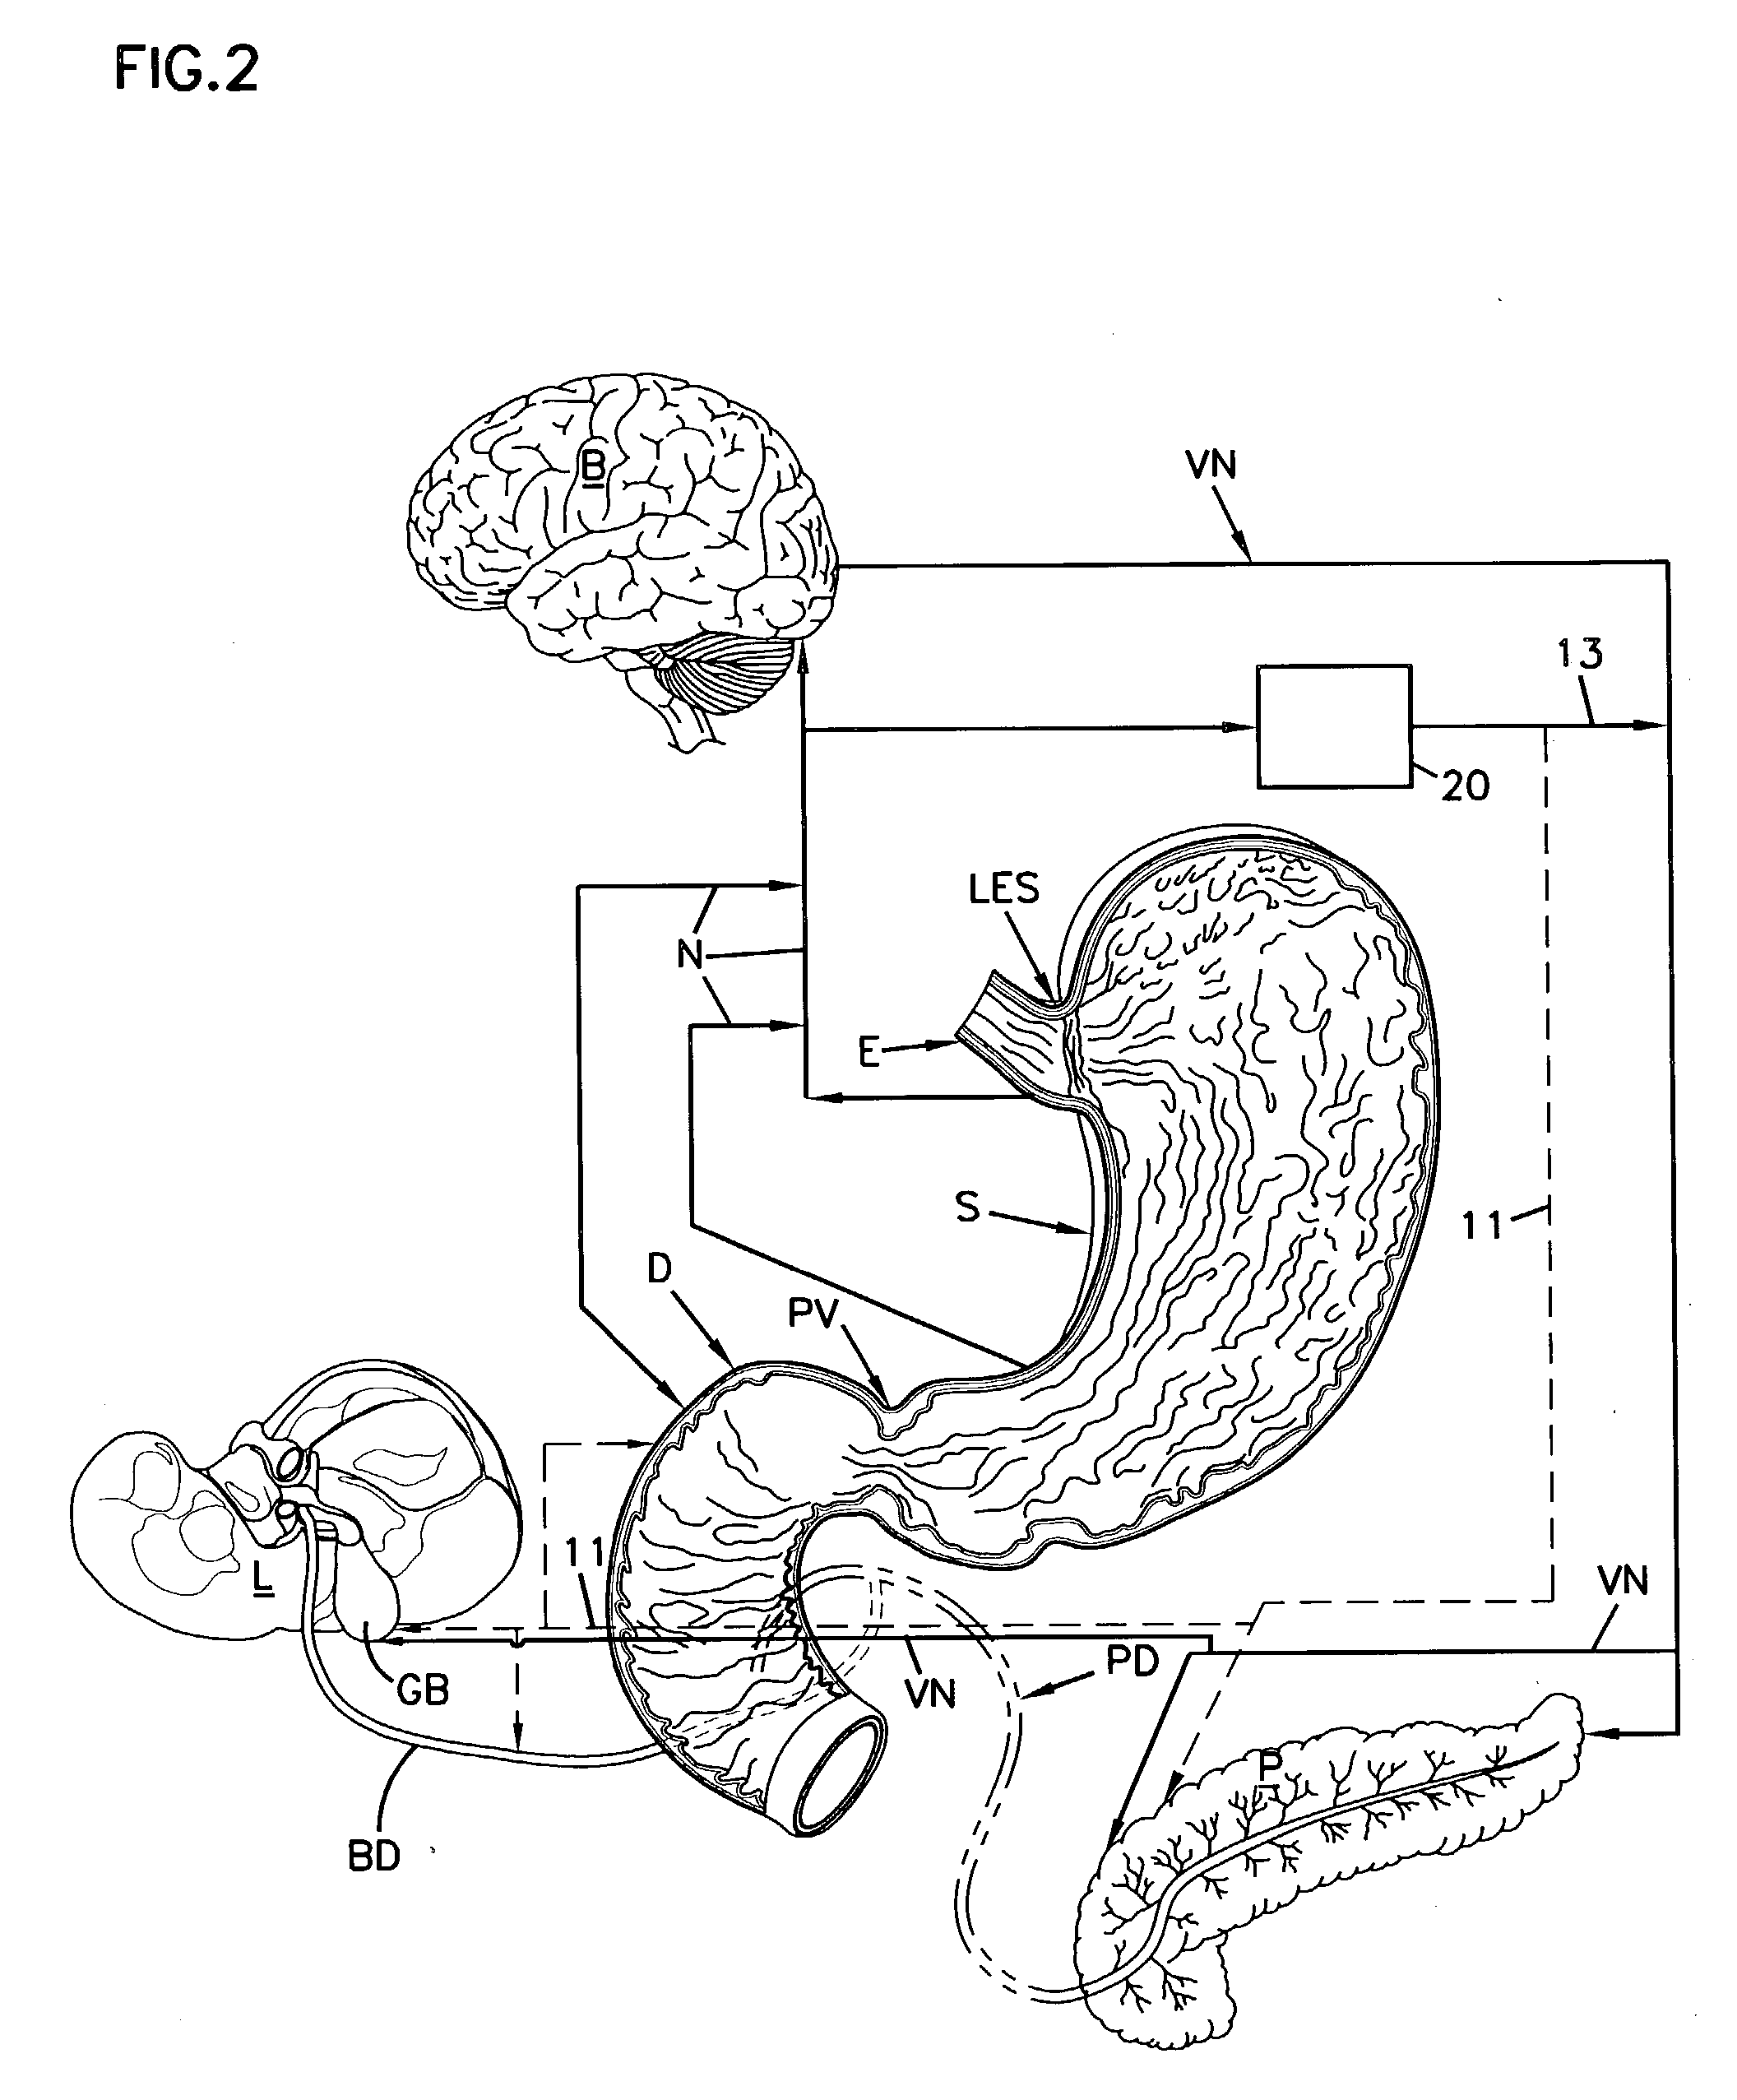 Method and apparatus for treatment of gastro-esophageal reflux disease (GERD)